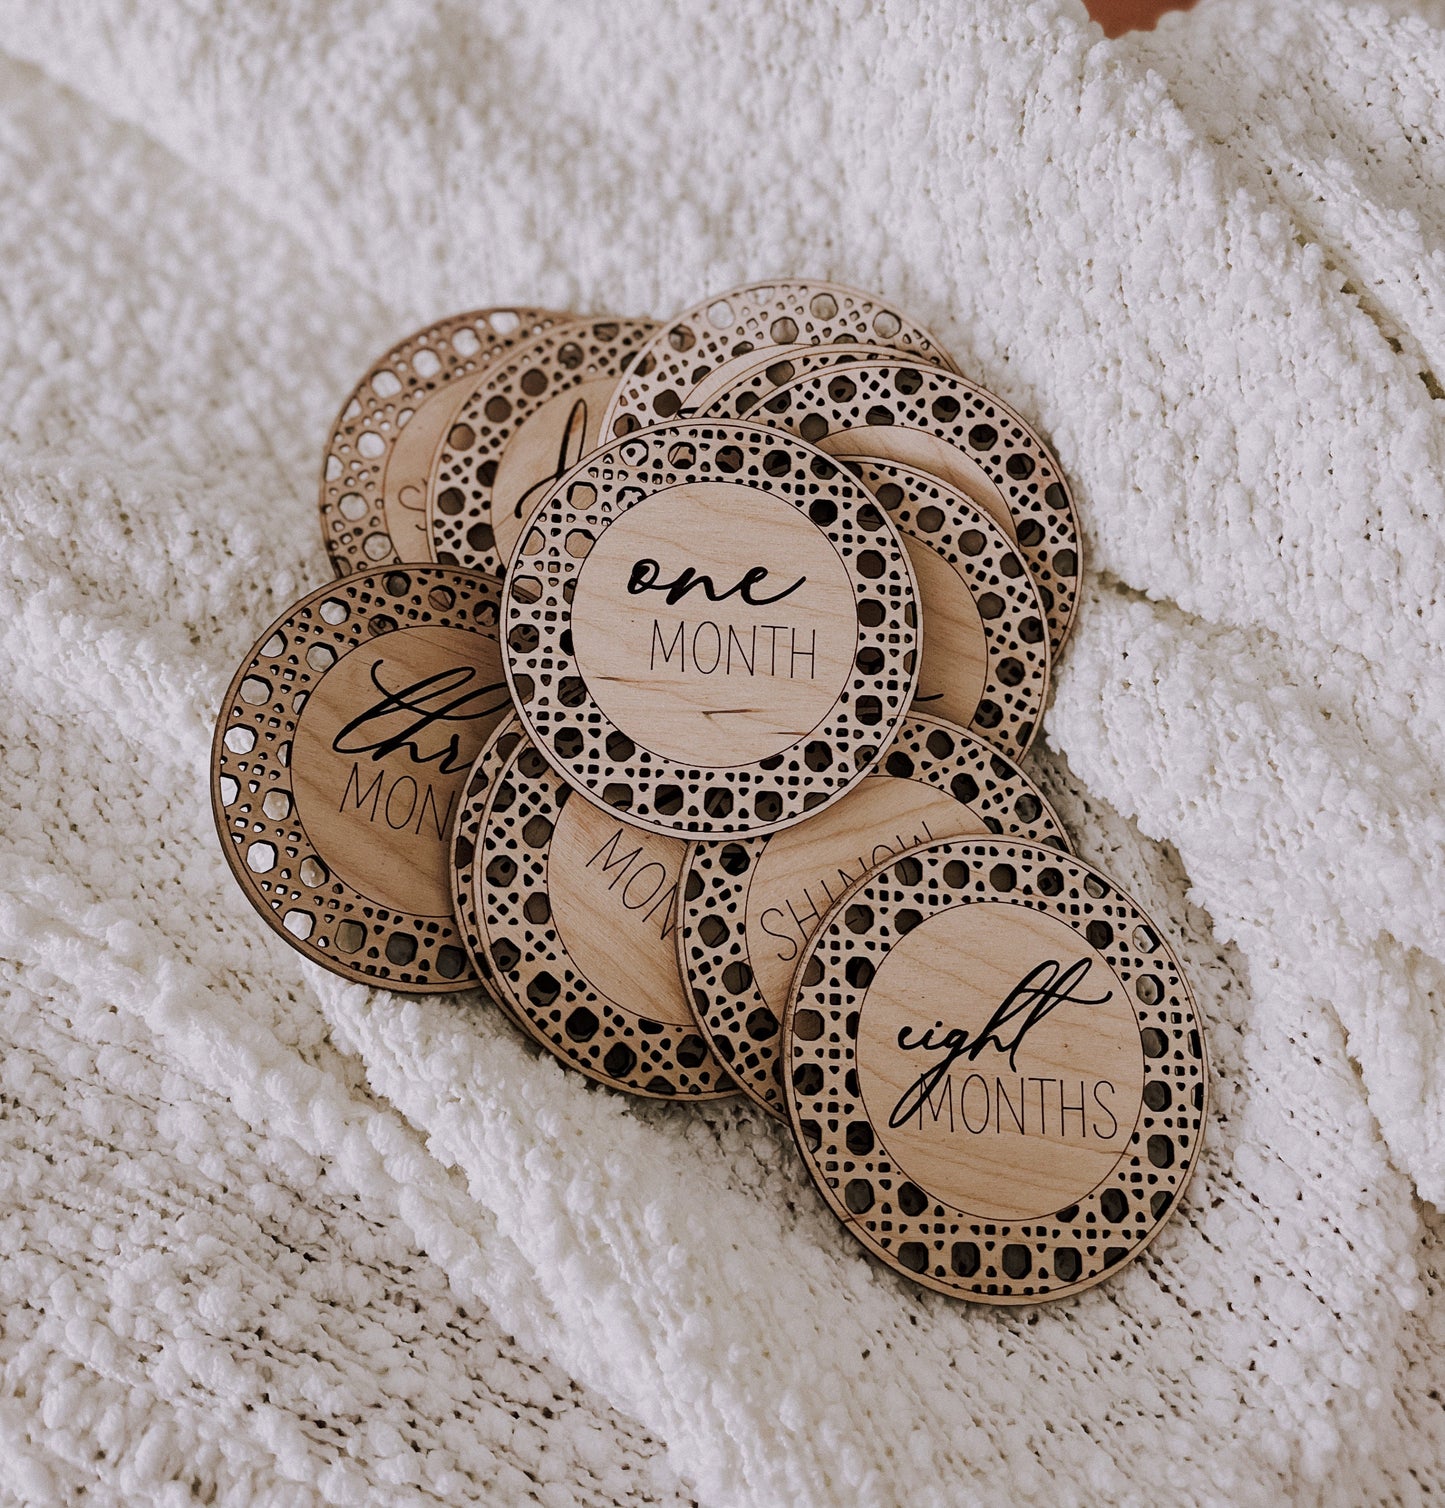 Boho Baby Monthly Milestone Markers, Laser Engraved Wood Monthly Markers, Baby Photo Props, Newborn and Birth Announcement, Baby Shower Gift